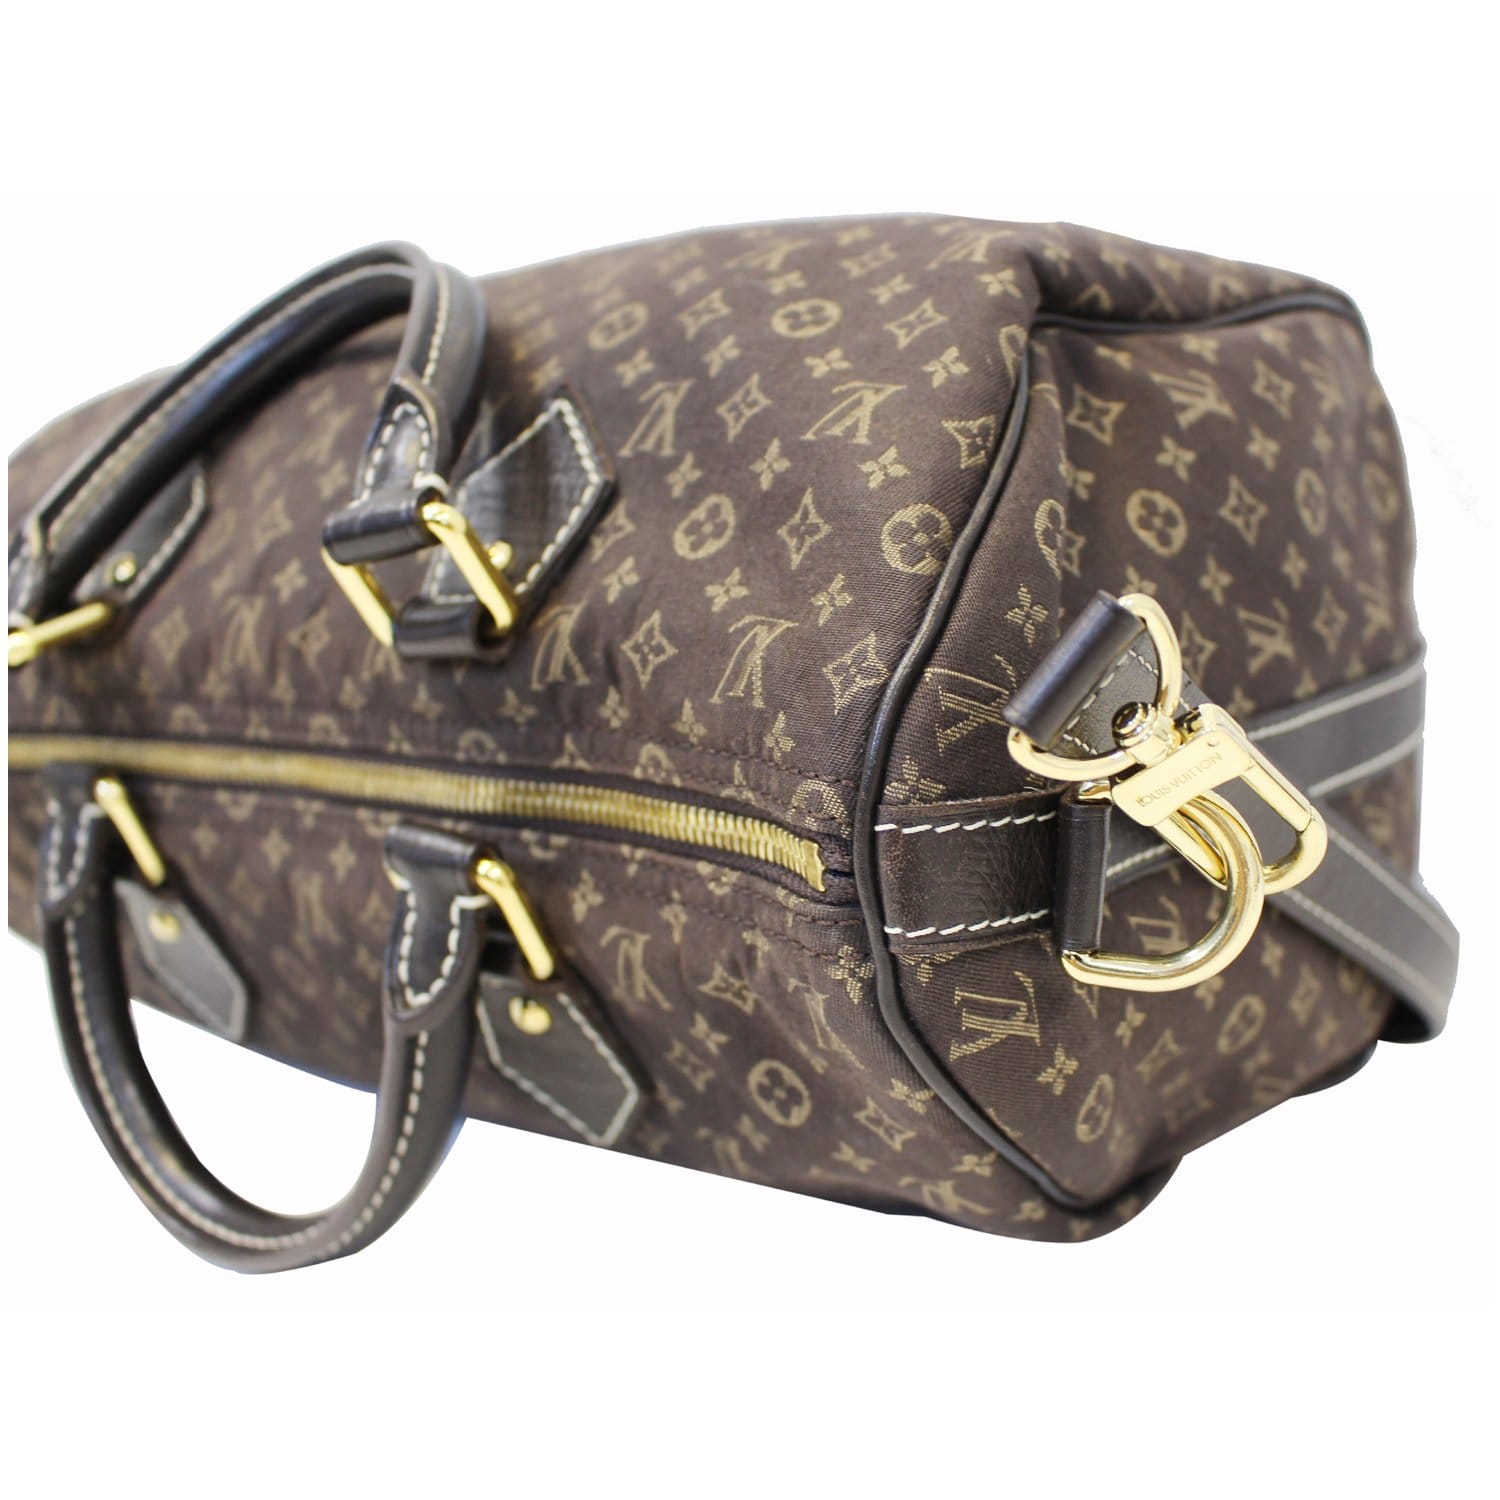 Louis Vuitton 2010 Pre-owned Limited Edition Speedy 30 Bag - Black